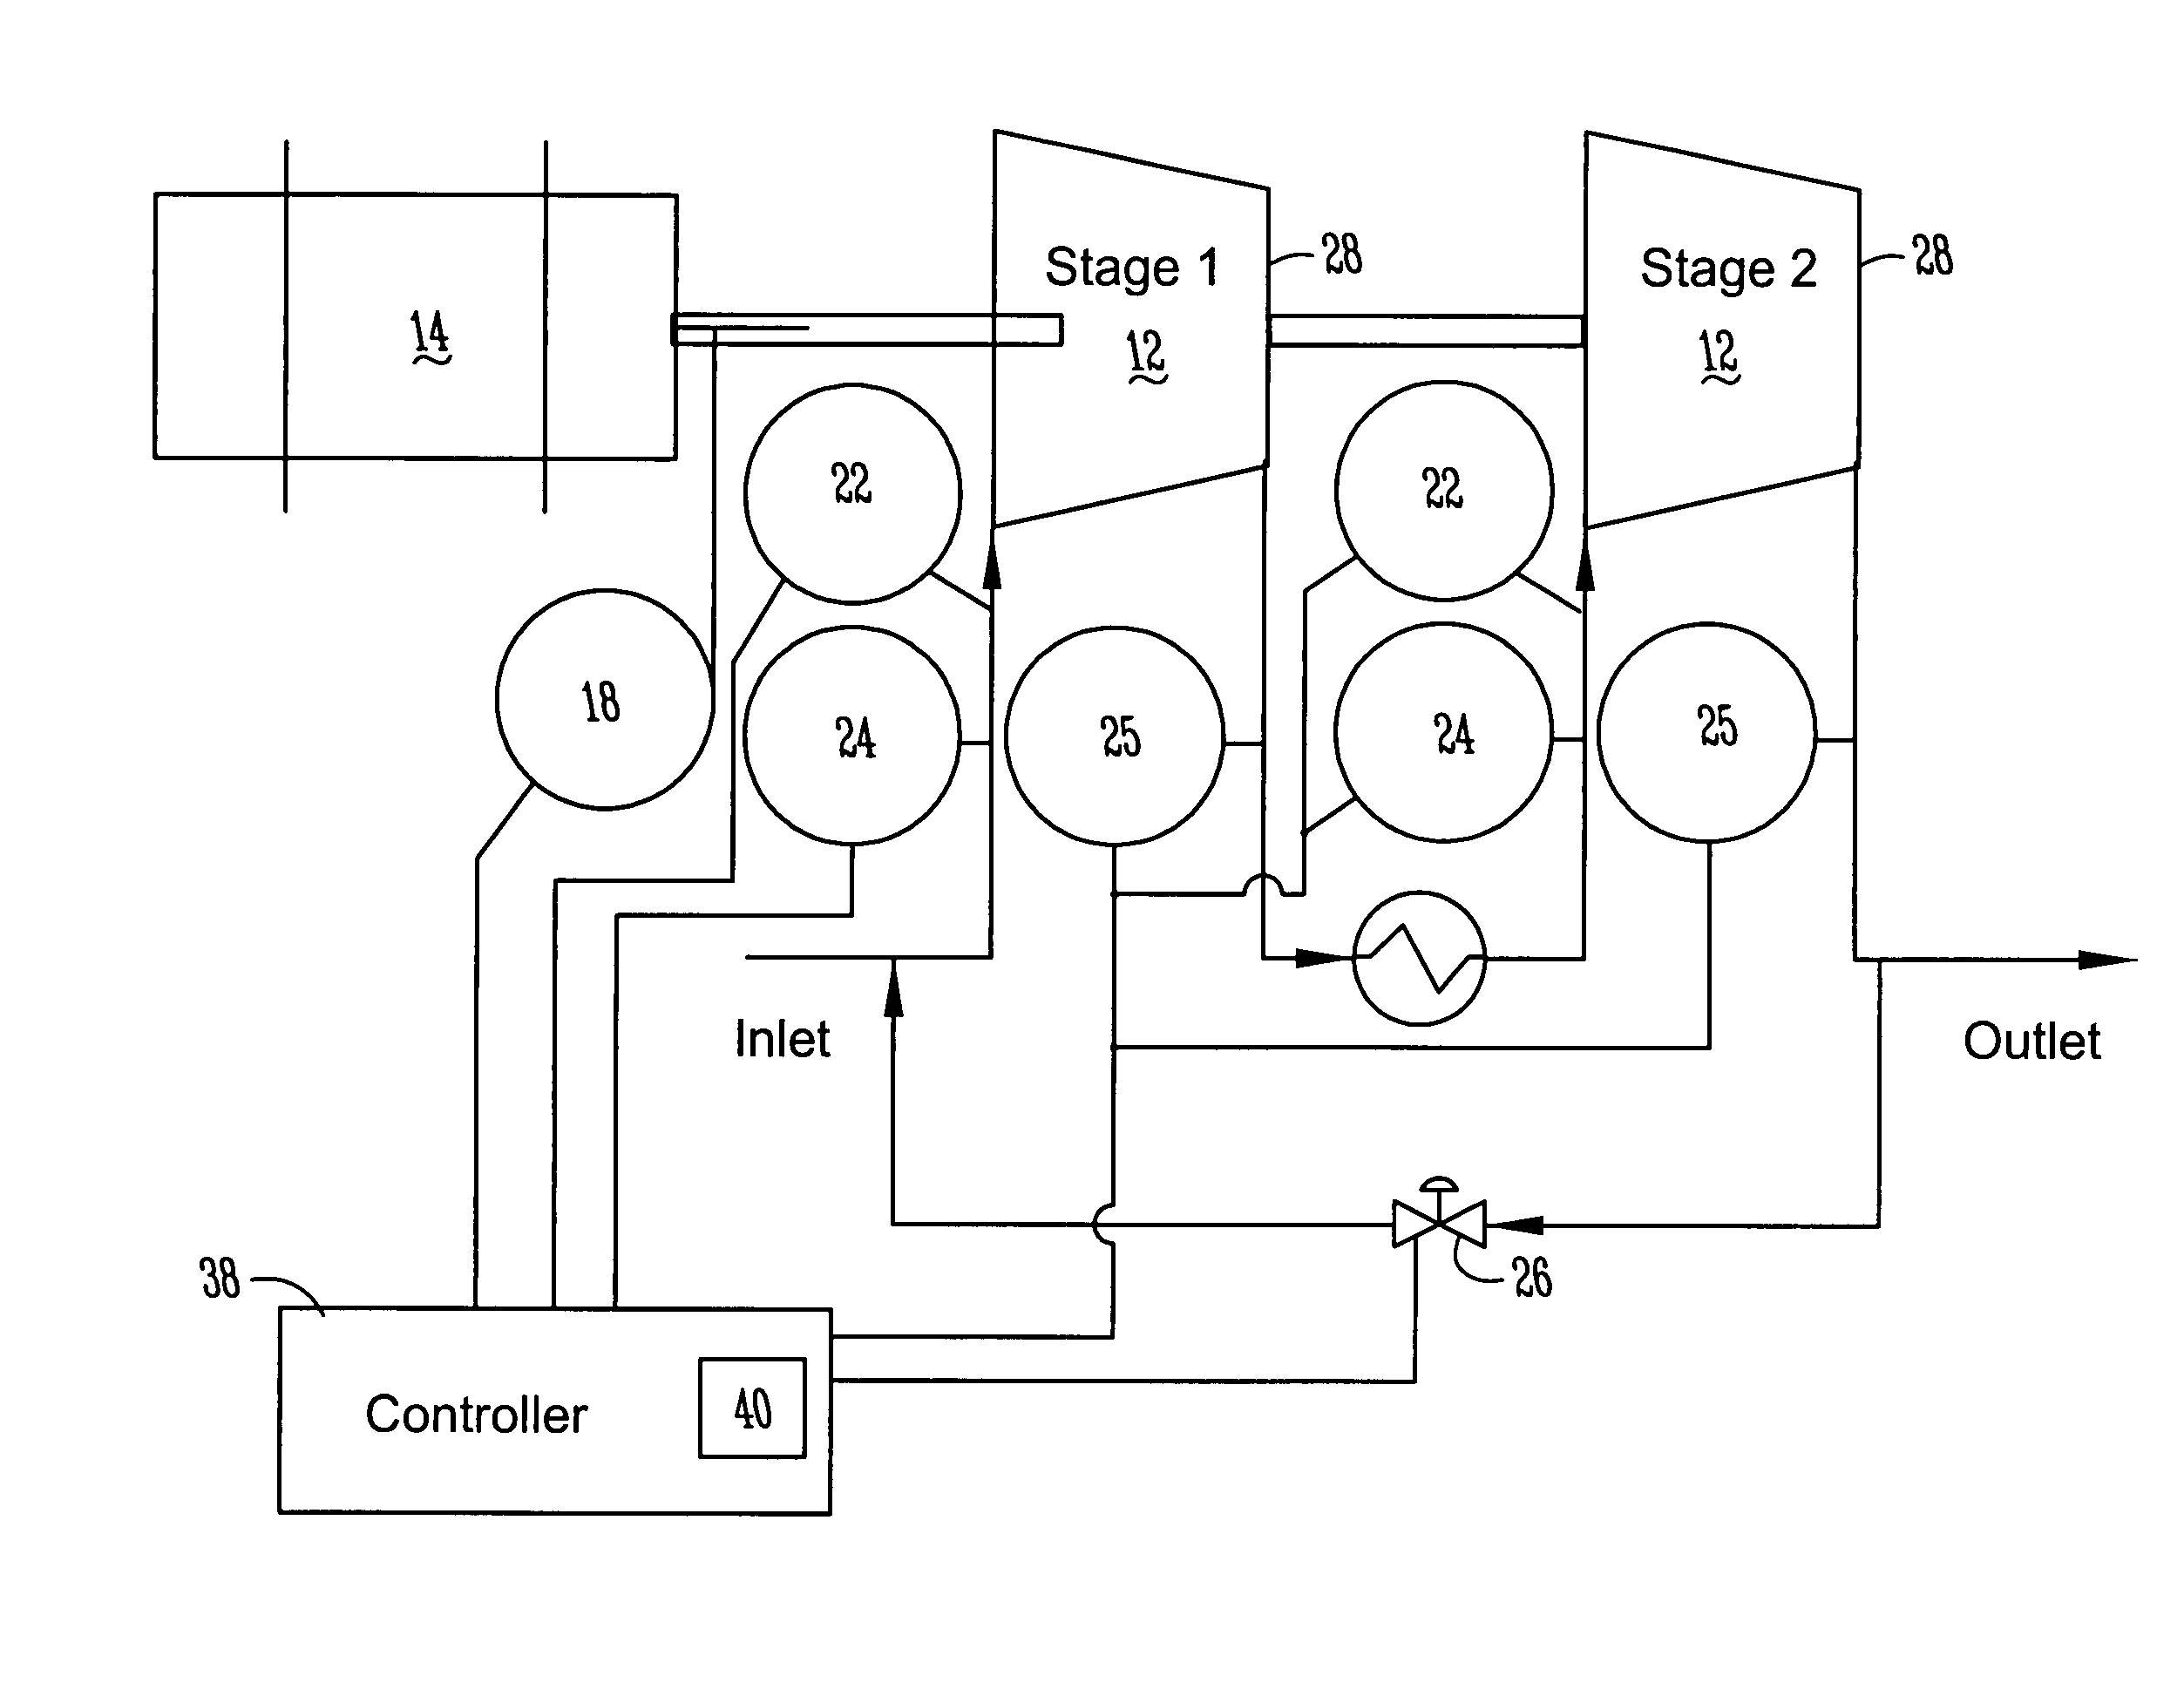 System and method of surge limit control for turbo compressors